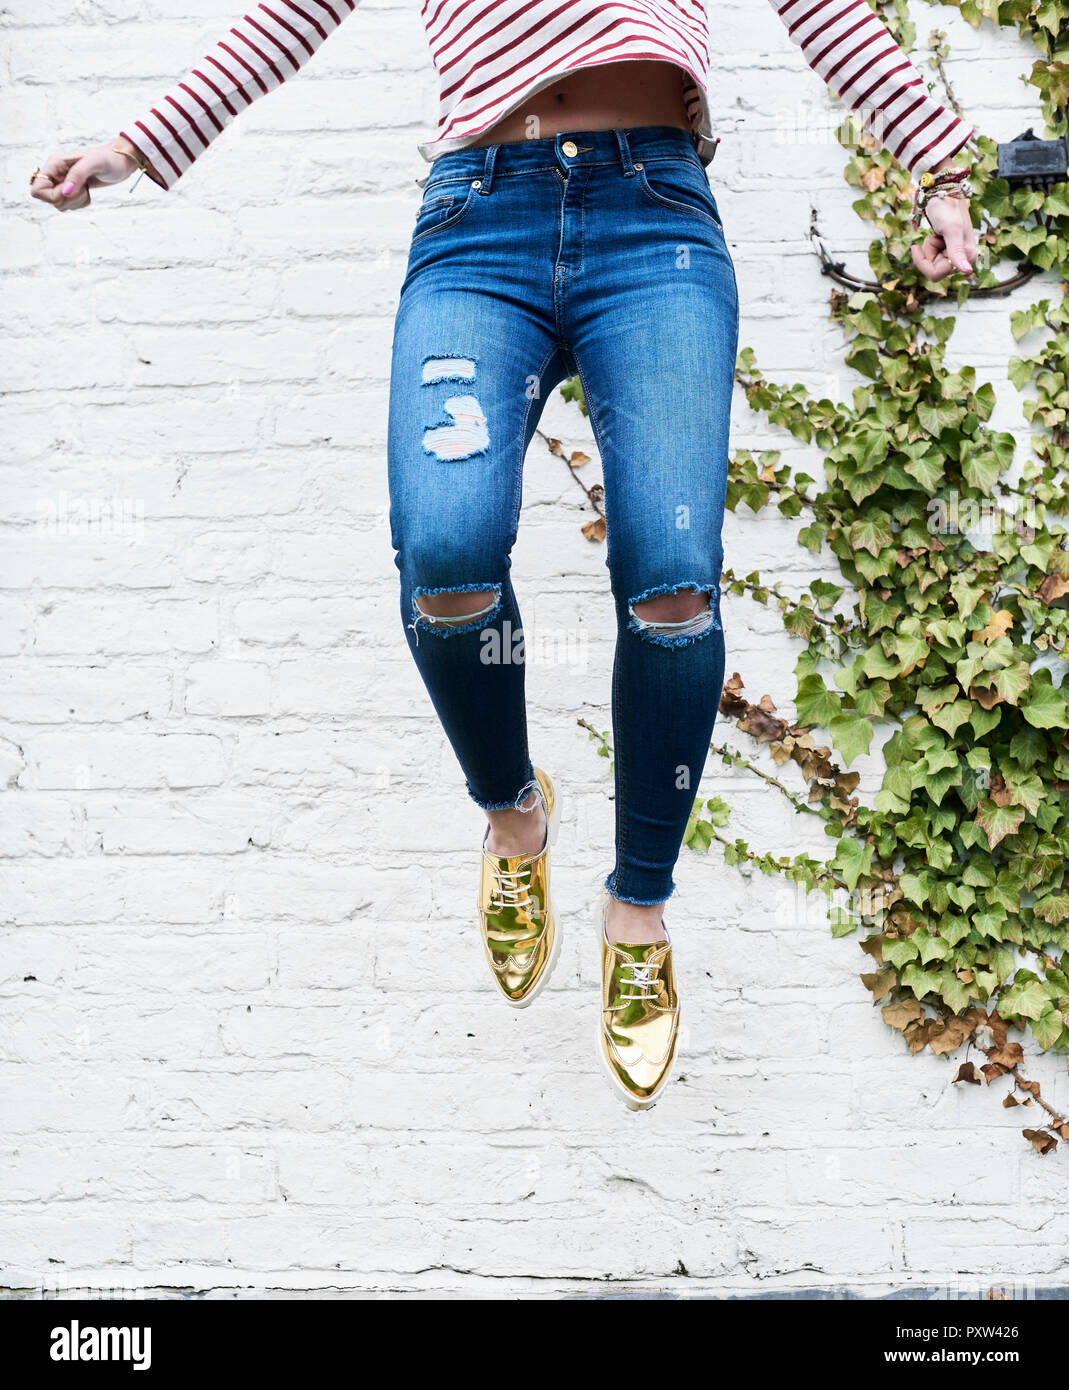 Legs of woman jumping in the air Stock Photo